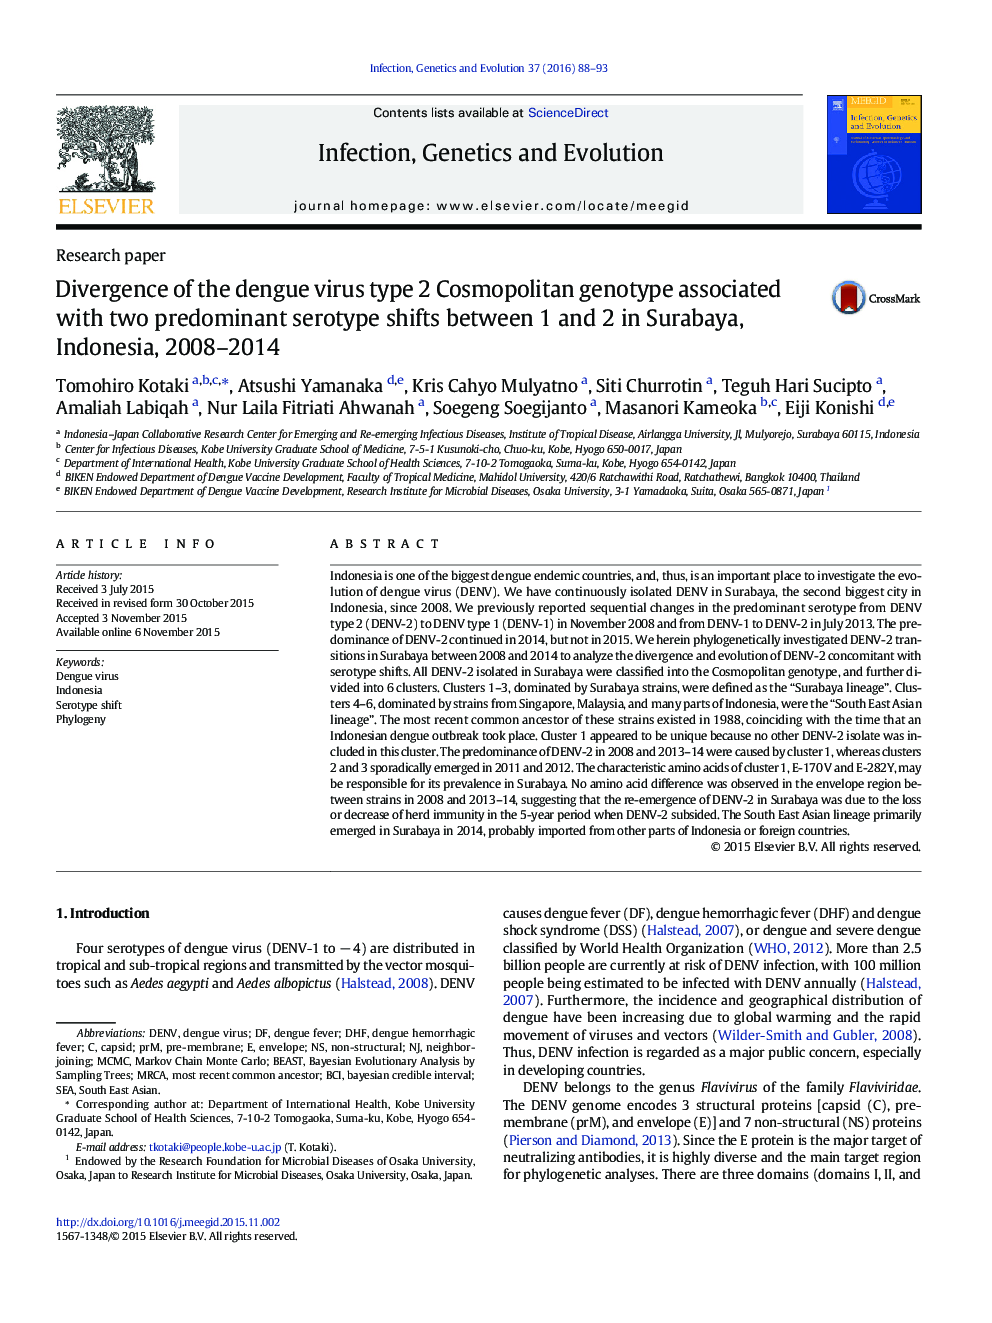 Research paperDivergence of the dengue virus type 2 Cosmopolitan genotype associated with two predominant serotype shifts between 1 and 2 in Surabaya, Indonesia, 2008-2014